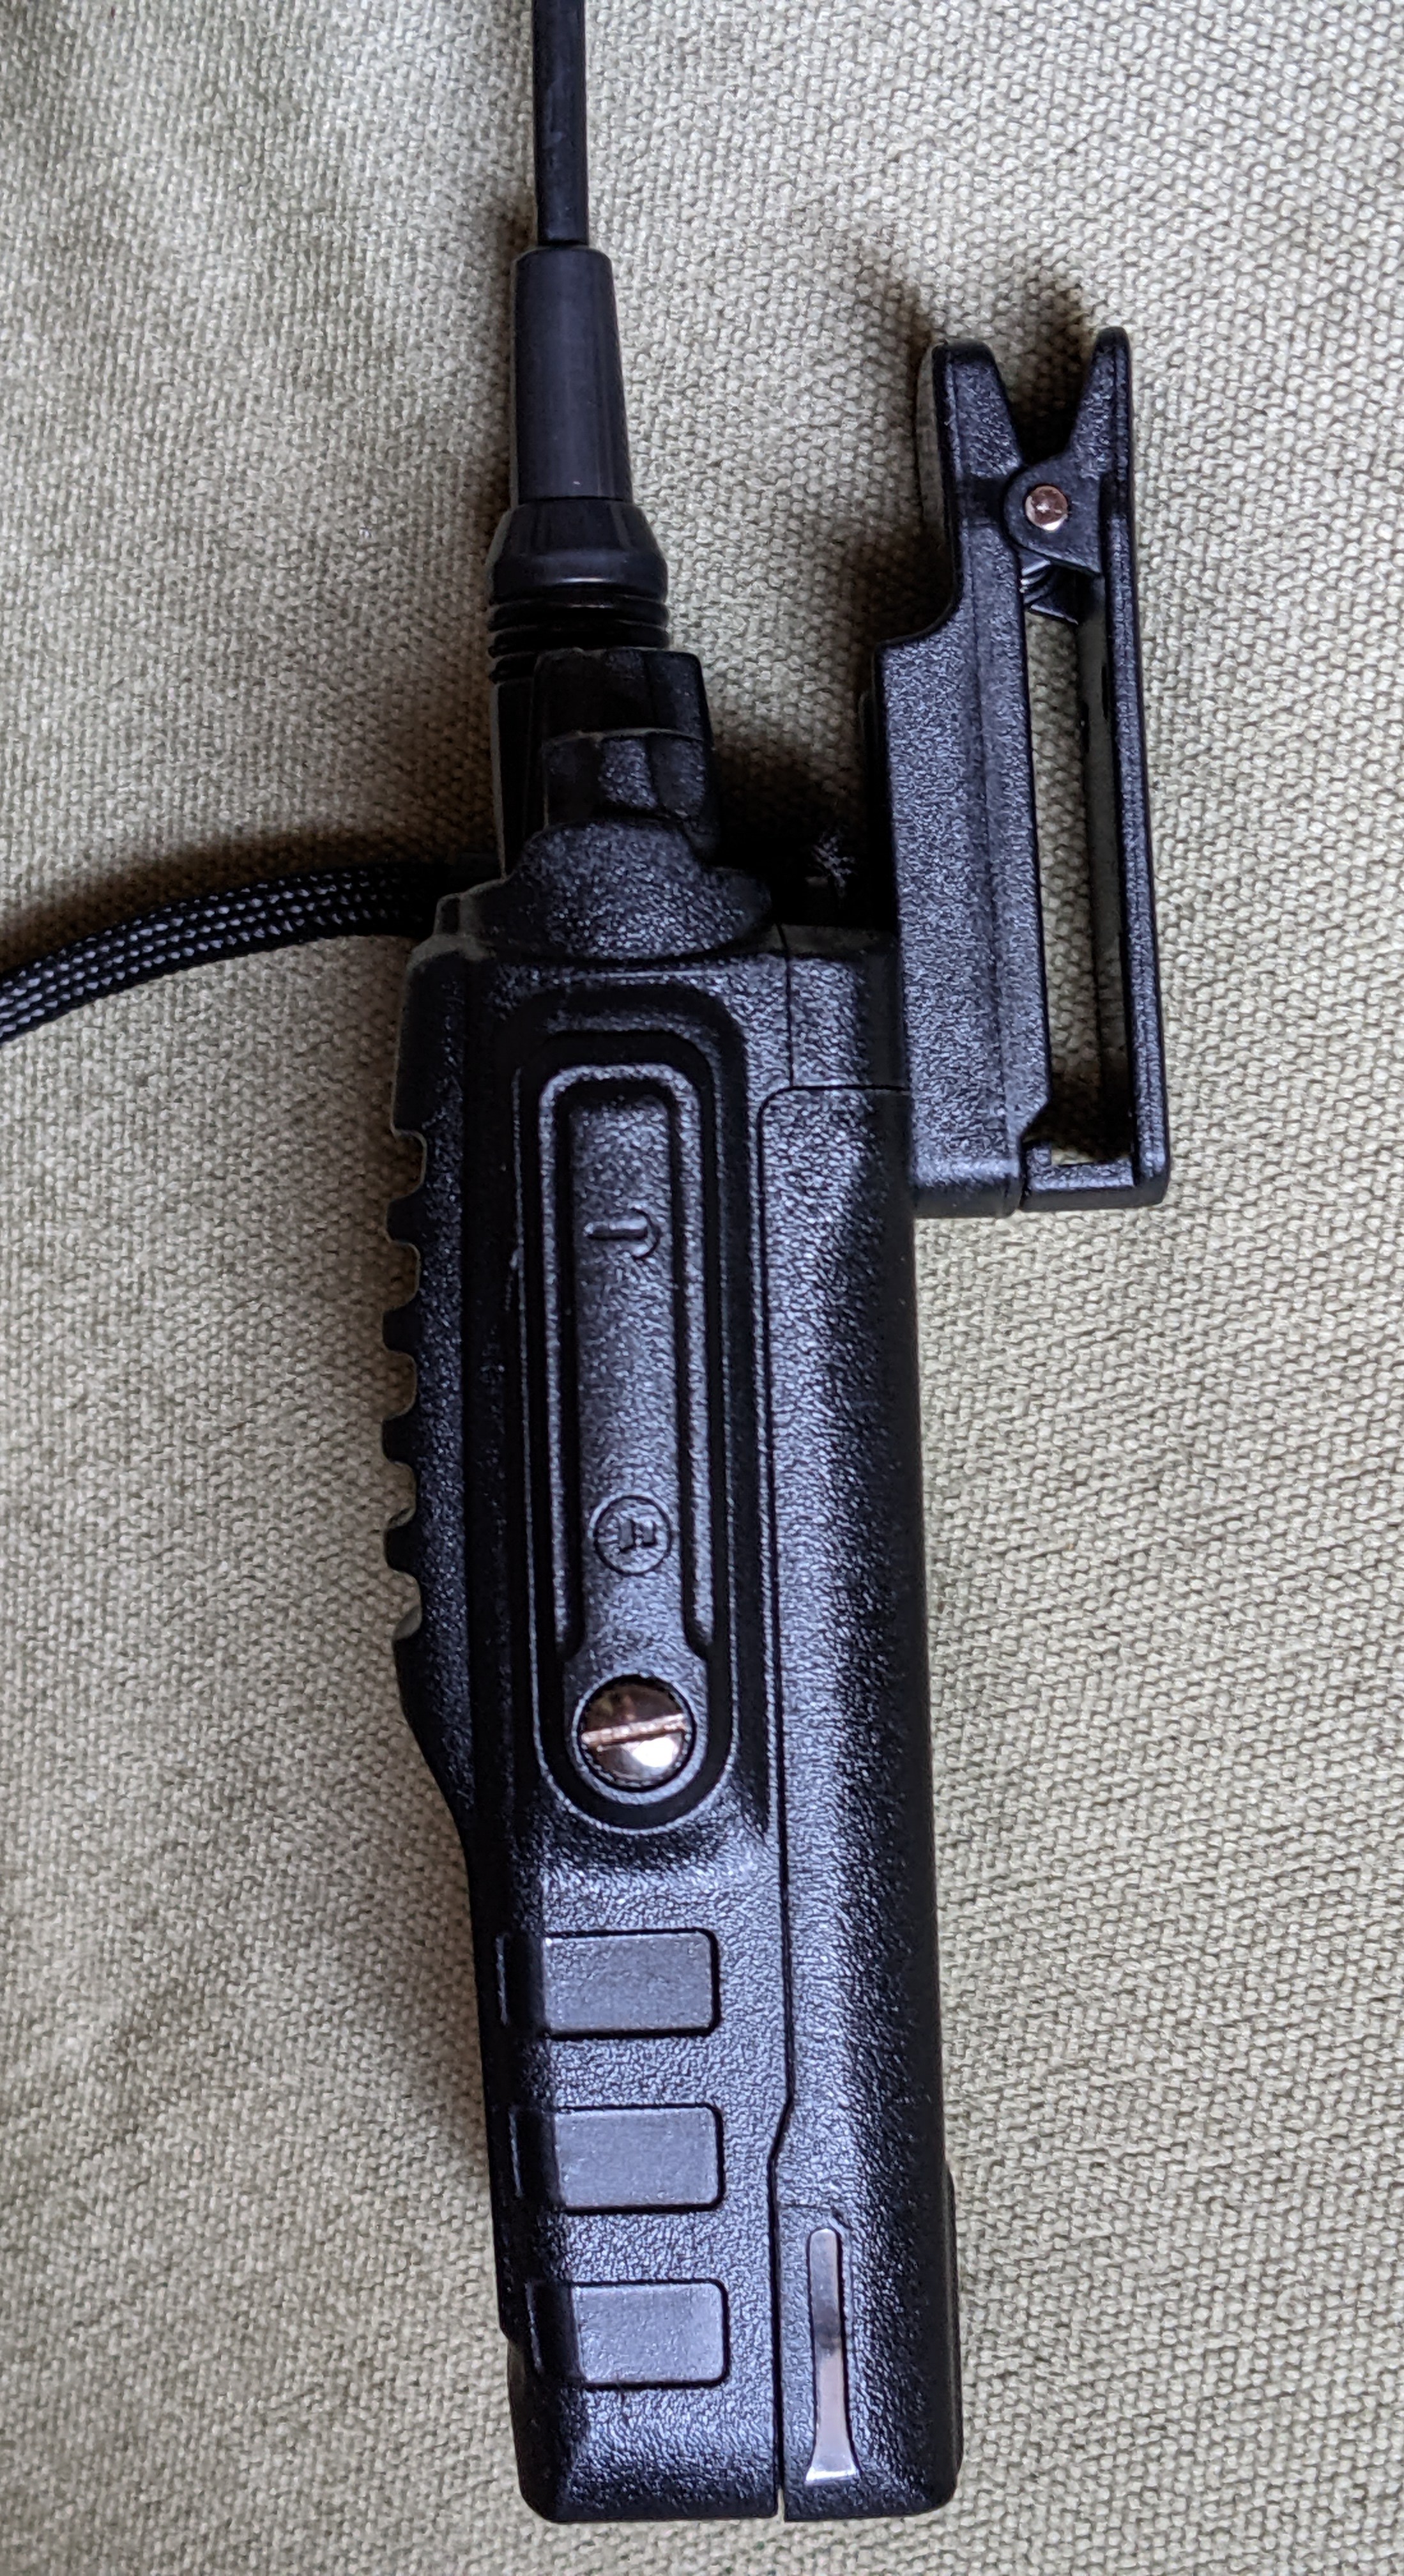 BF-9700 side view